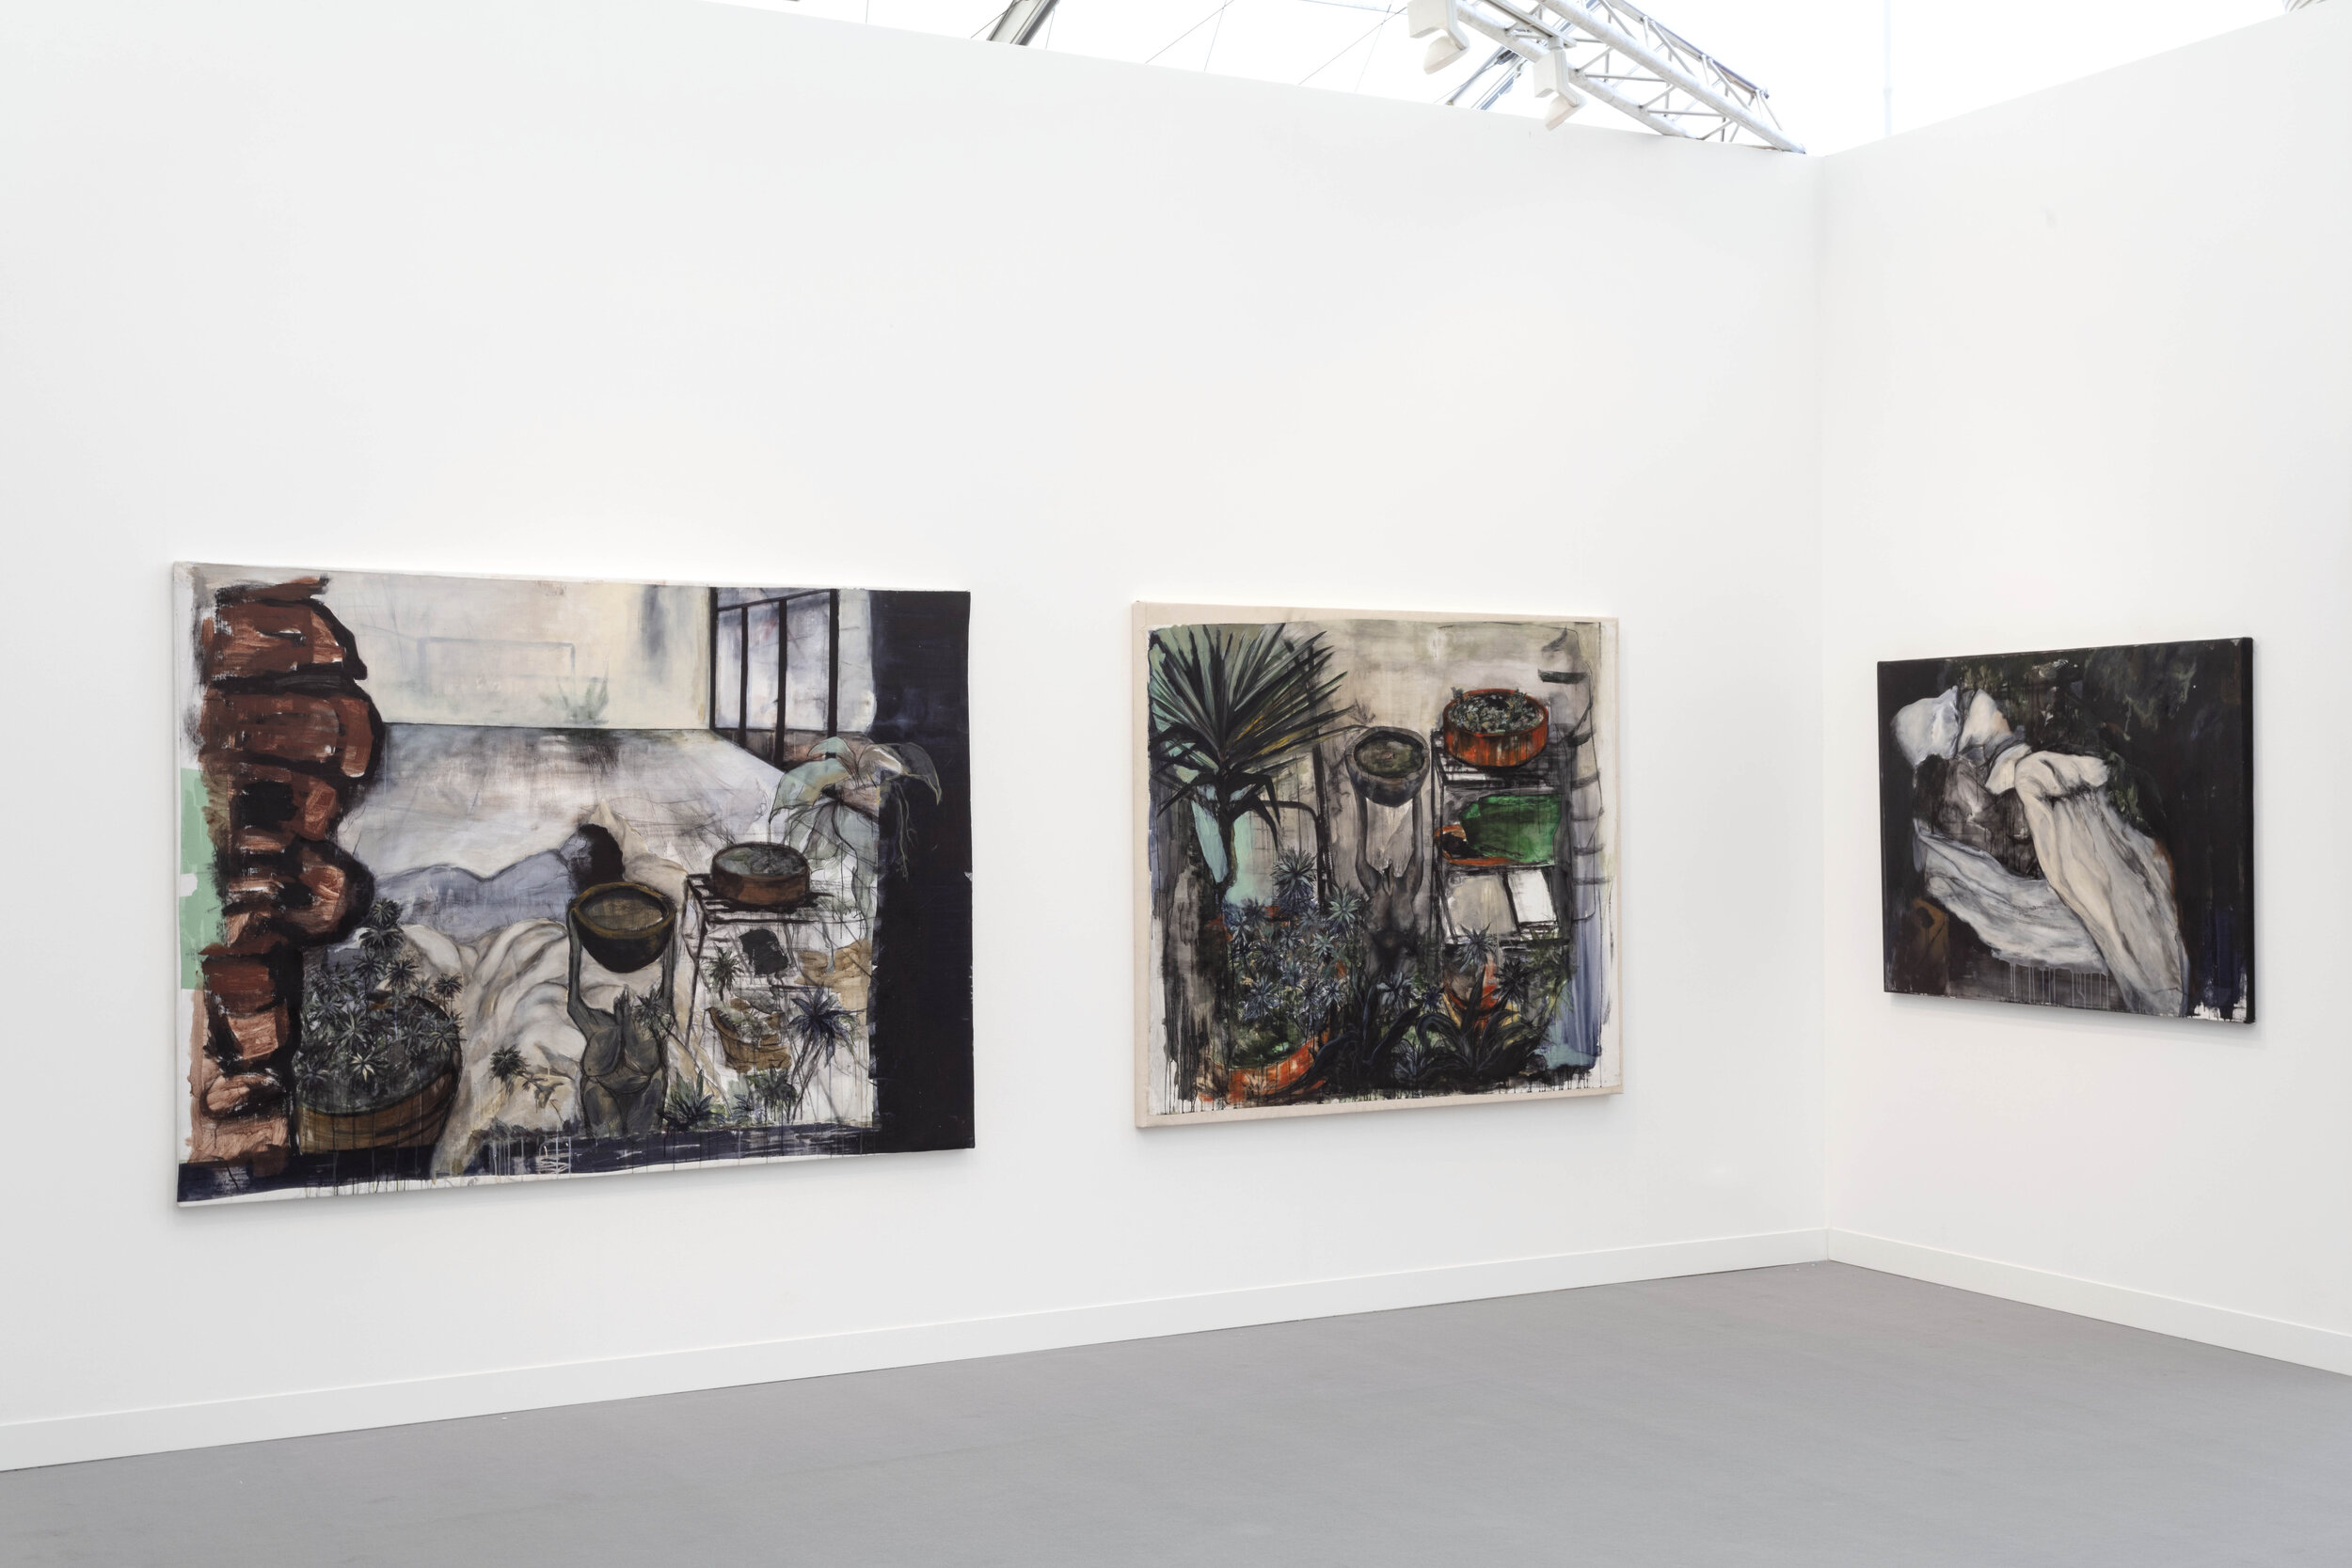  Installation View of Jungle (h135x w165cm), Offering (h147x w197cm) and OfferingII (h138 x w165cm) each mixed media on paper 